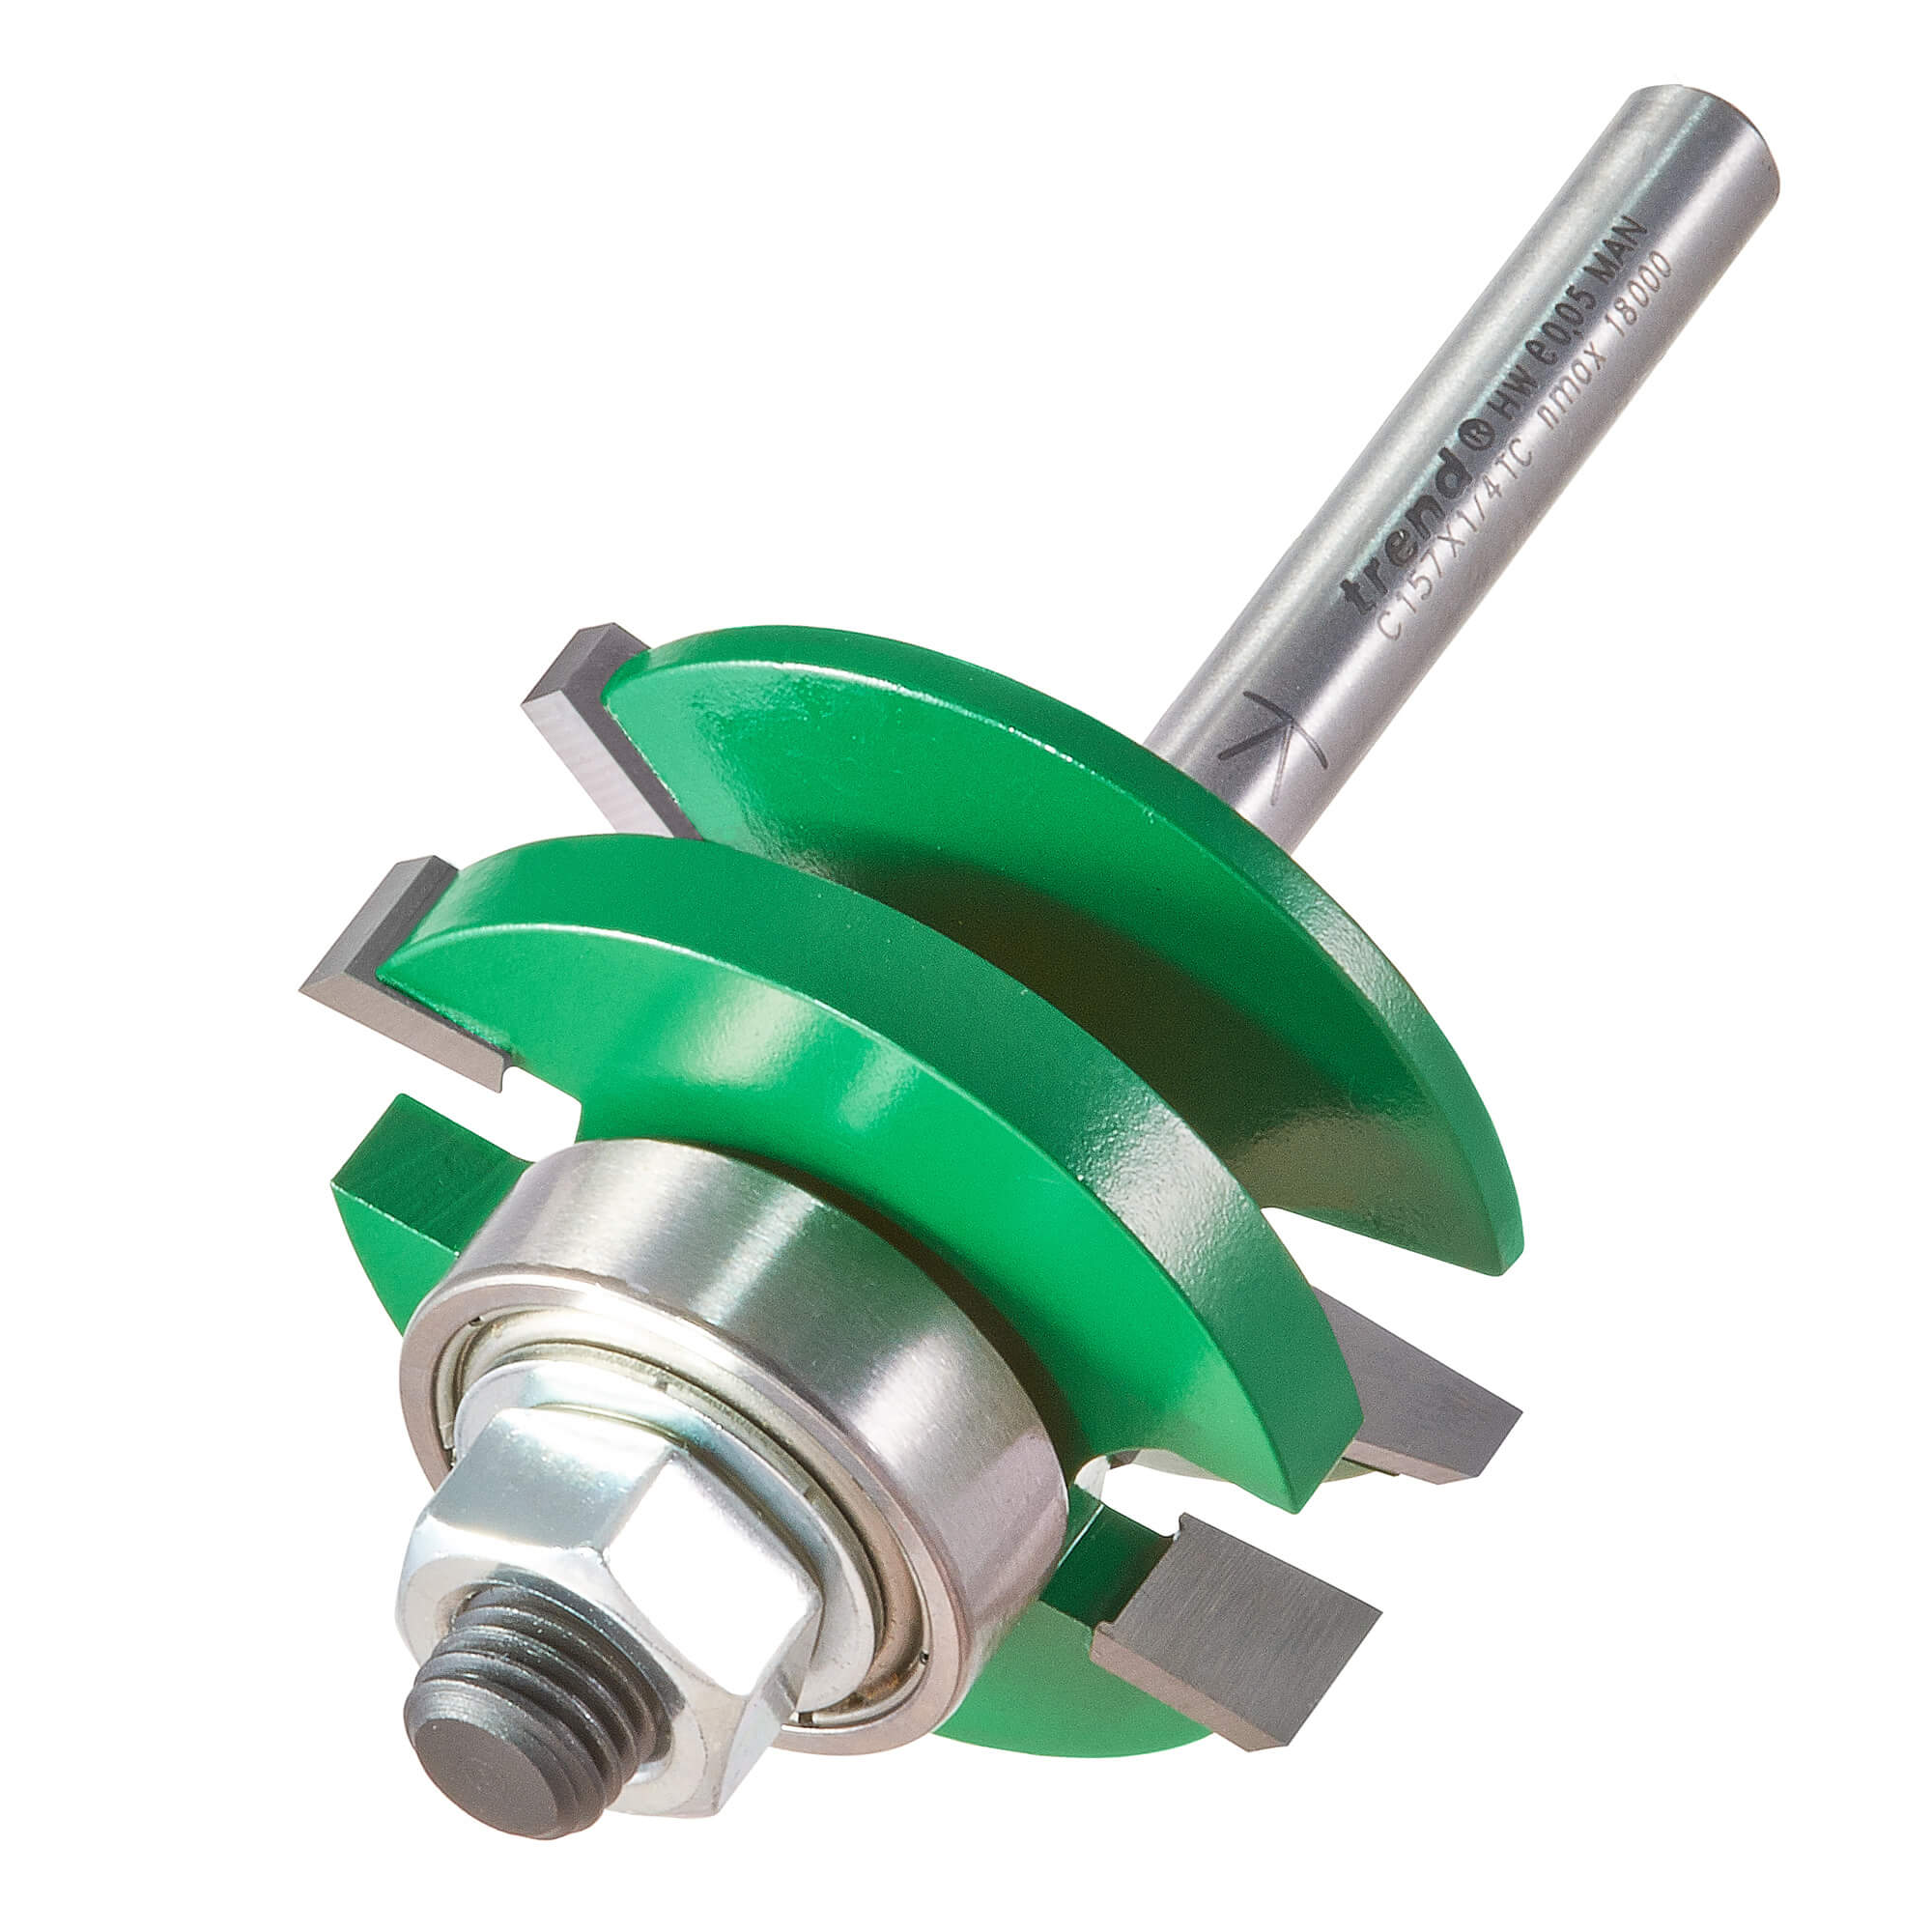 Image of Trend CRAFTPRO Bearing Guided Combination Raised Bevel Router Cutter 41mm 17mm 1/4"